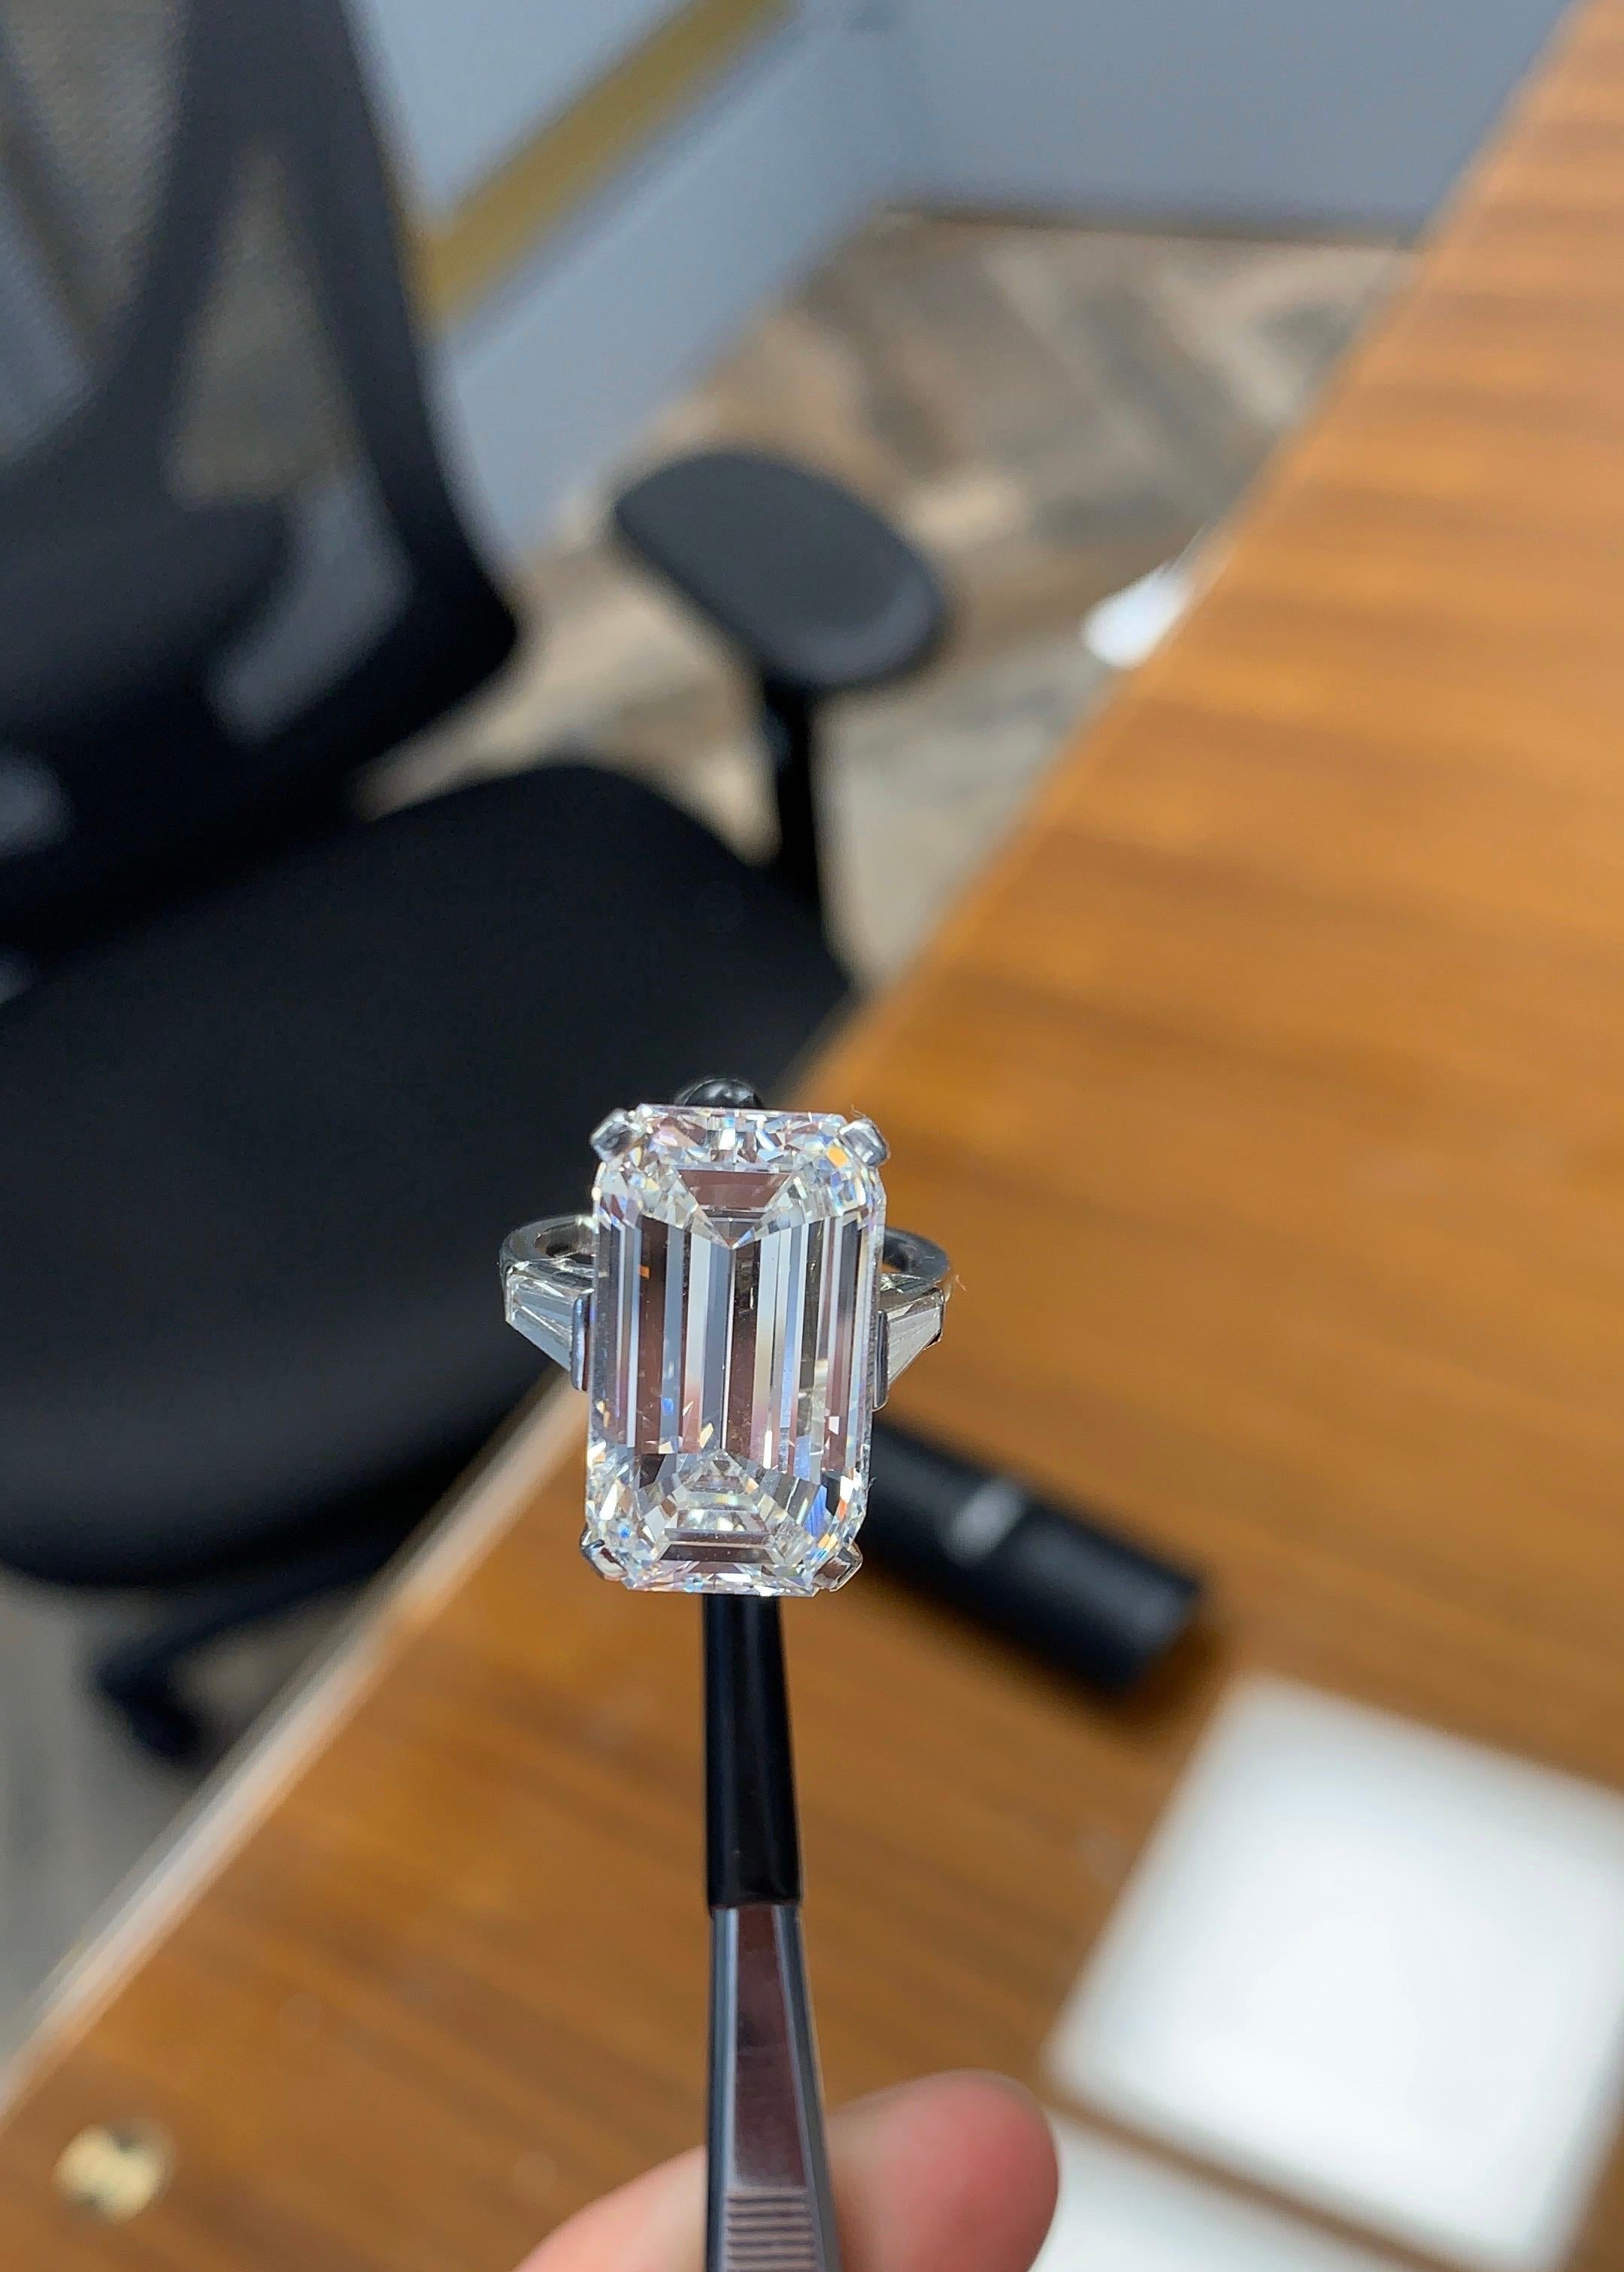 Elegant and bright engagement ring.
This emerald cut diamond ring is a Beauty, looks far larger then it’s actual weight.
While a lot of emerald cut diamonds are slightly glassy looking, this diamond features a 59% table allowing for full